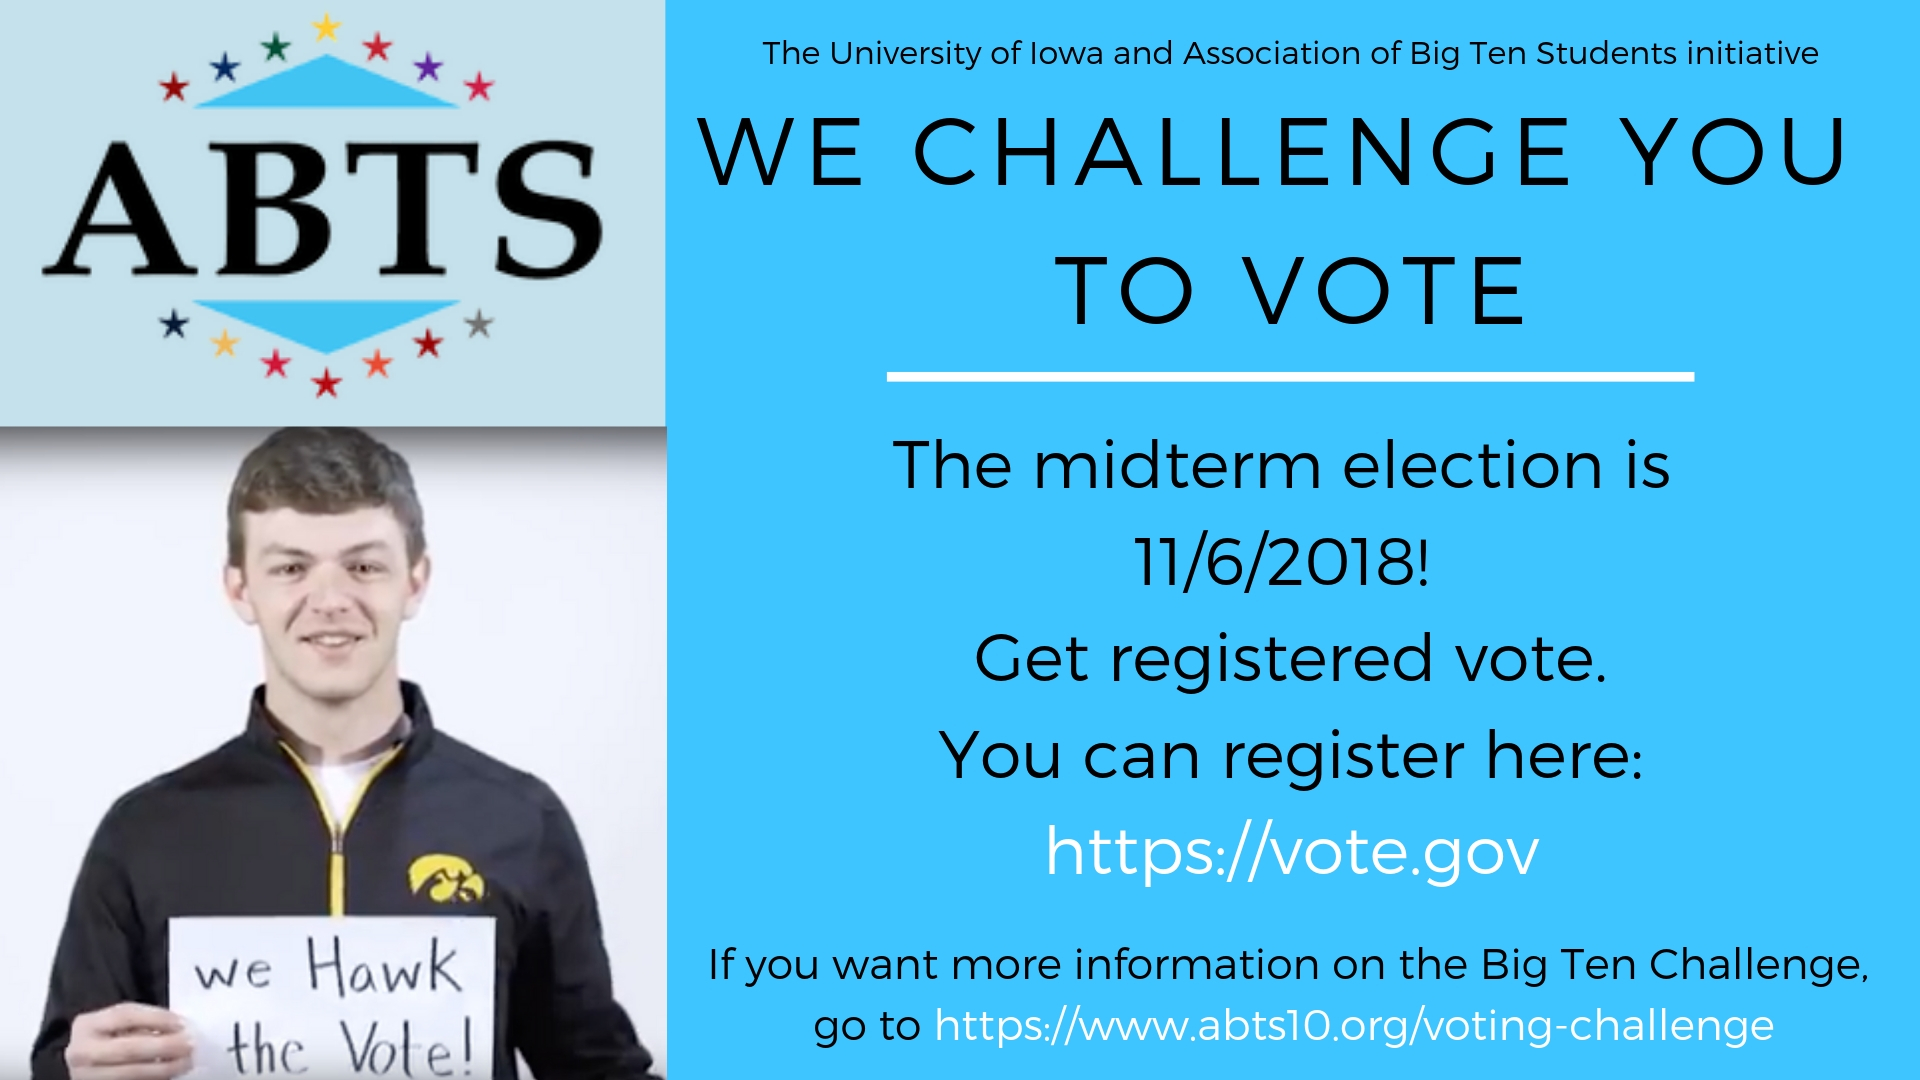 The university Iowa and association of big ten students initiative. We challenge you to vote. The midterm election is 11/6/2018! Get registered to vote. You can register here: https://vote.gov. If you want more information on the Big Ten Challenge, go to https://www.abts10.org/voting-challenge